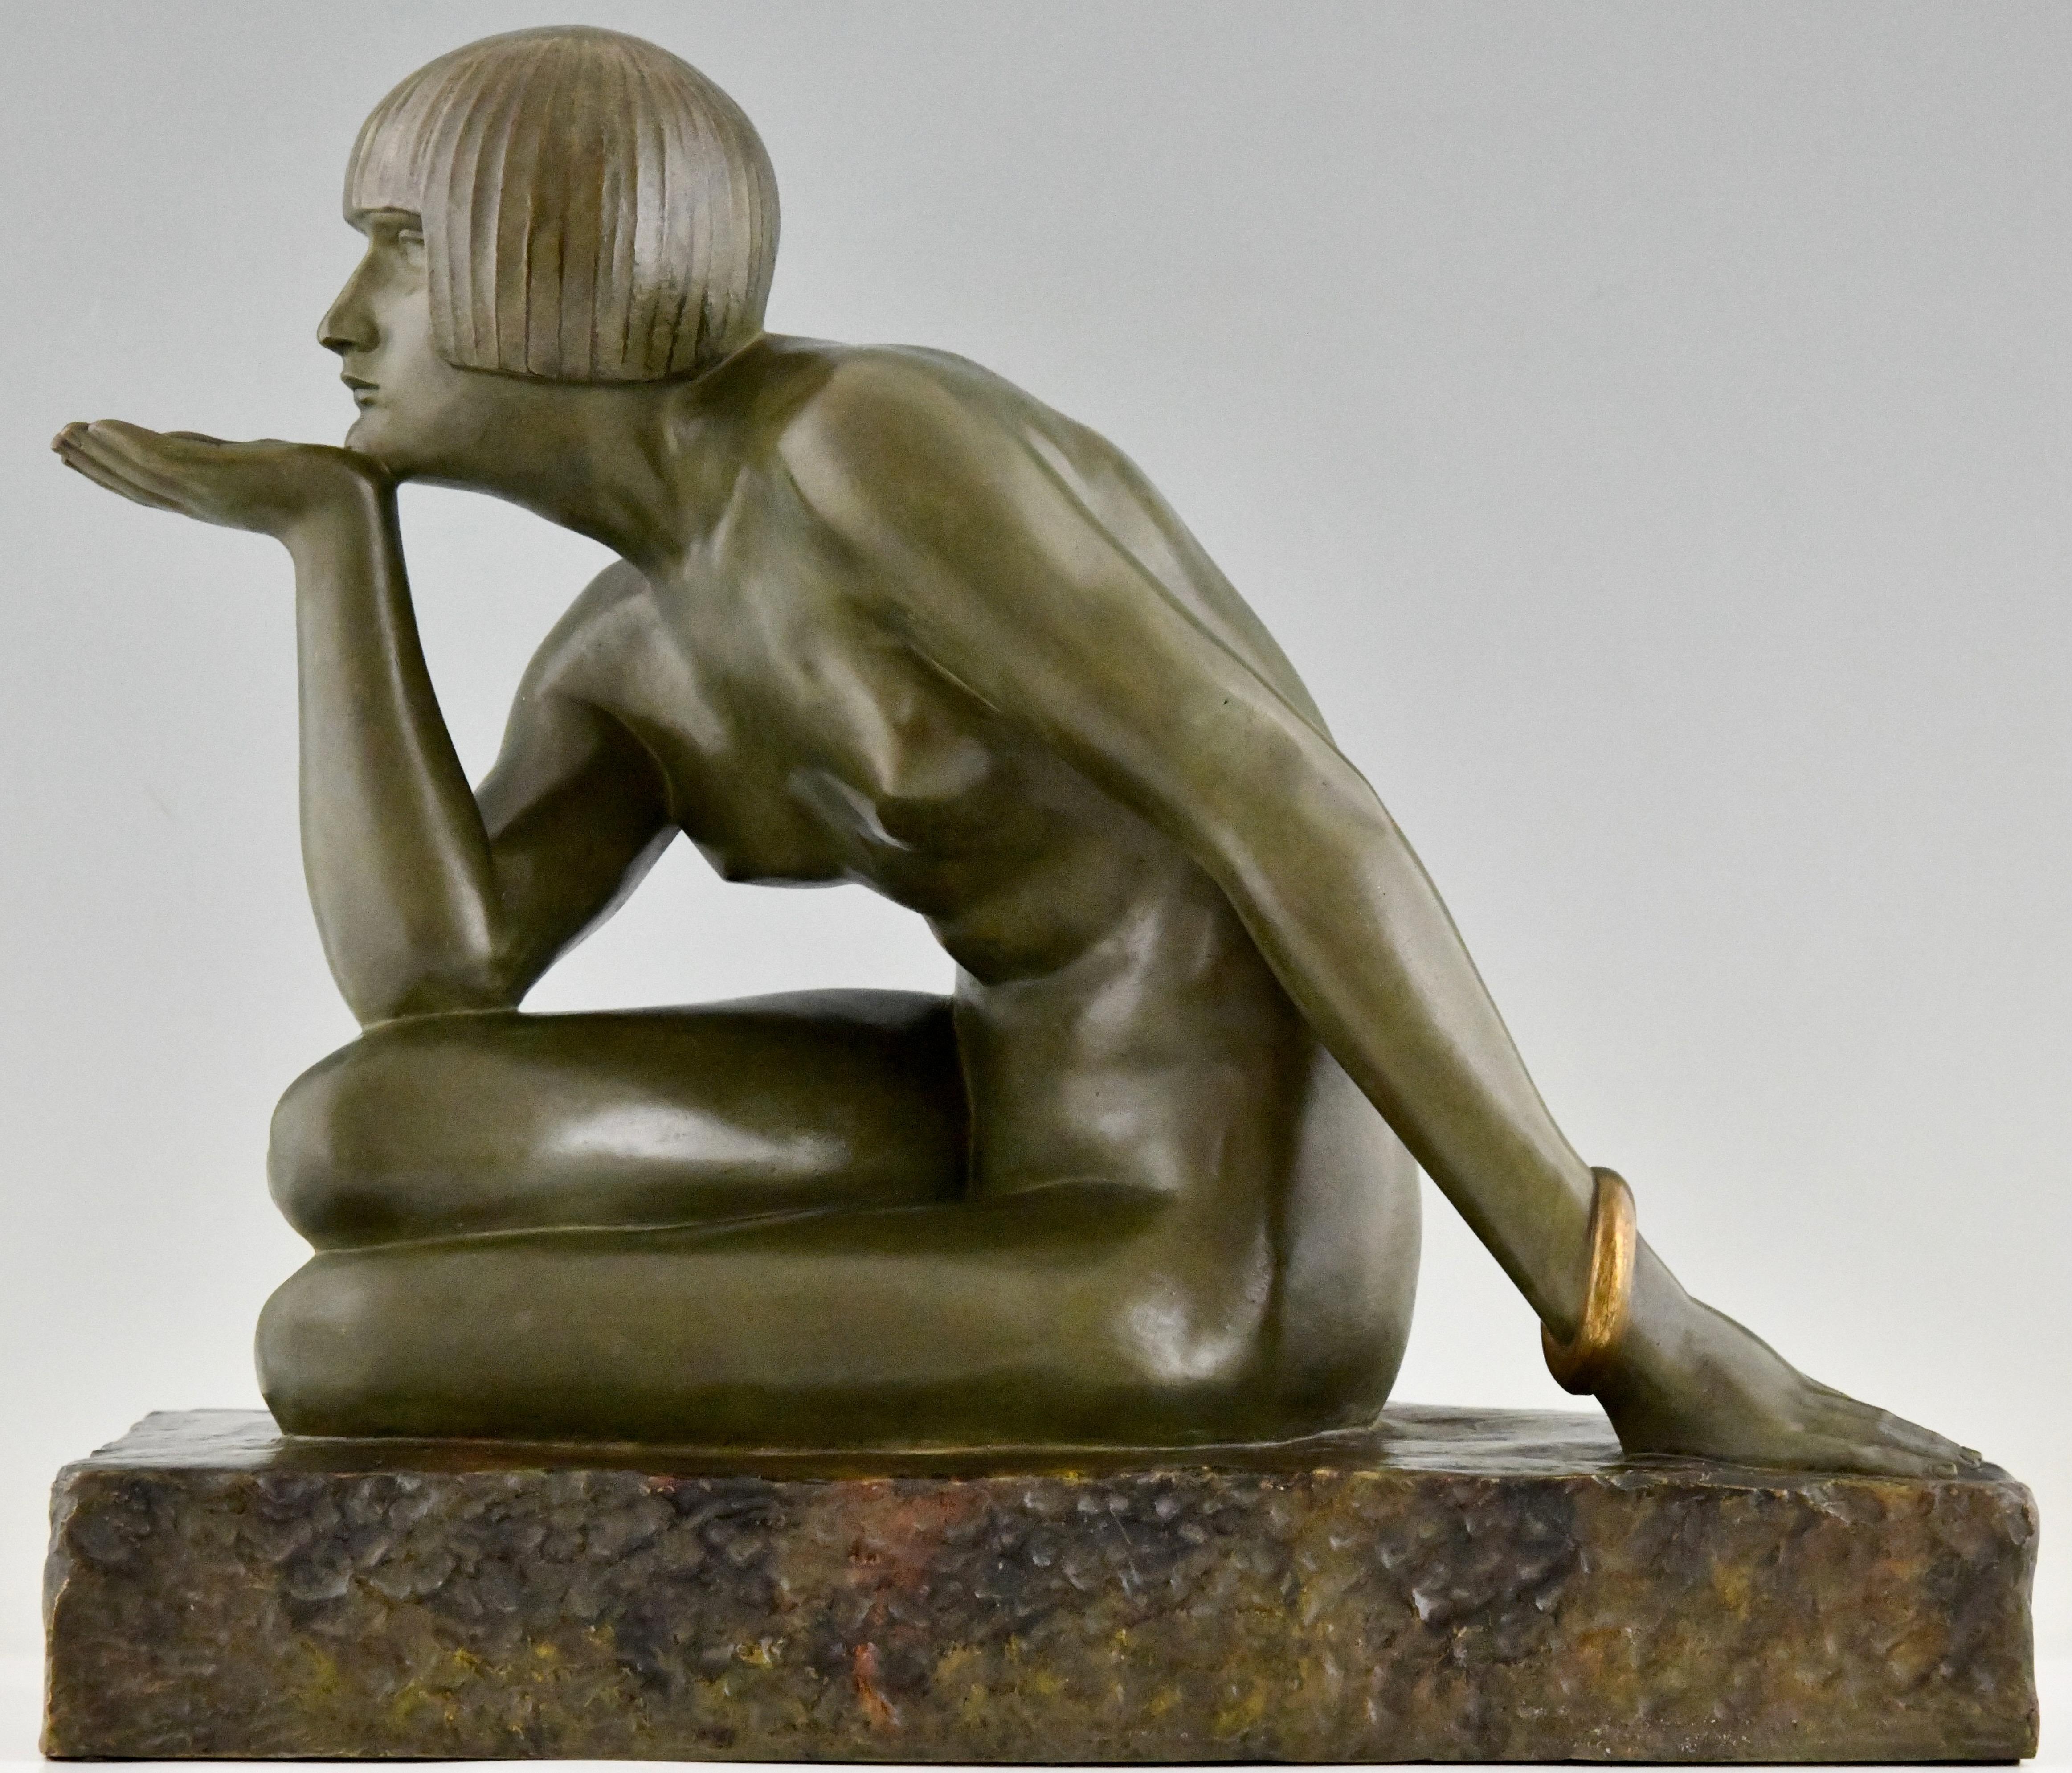 Early 20th Century Enigma Art Deco bronze sculpture seated nude with bracelet by Guiraud Rivière